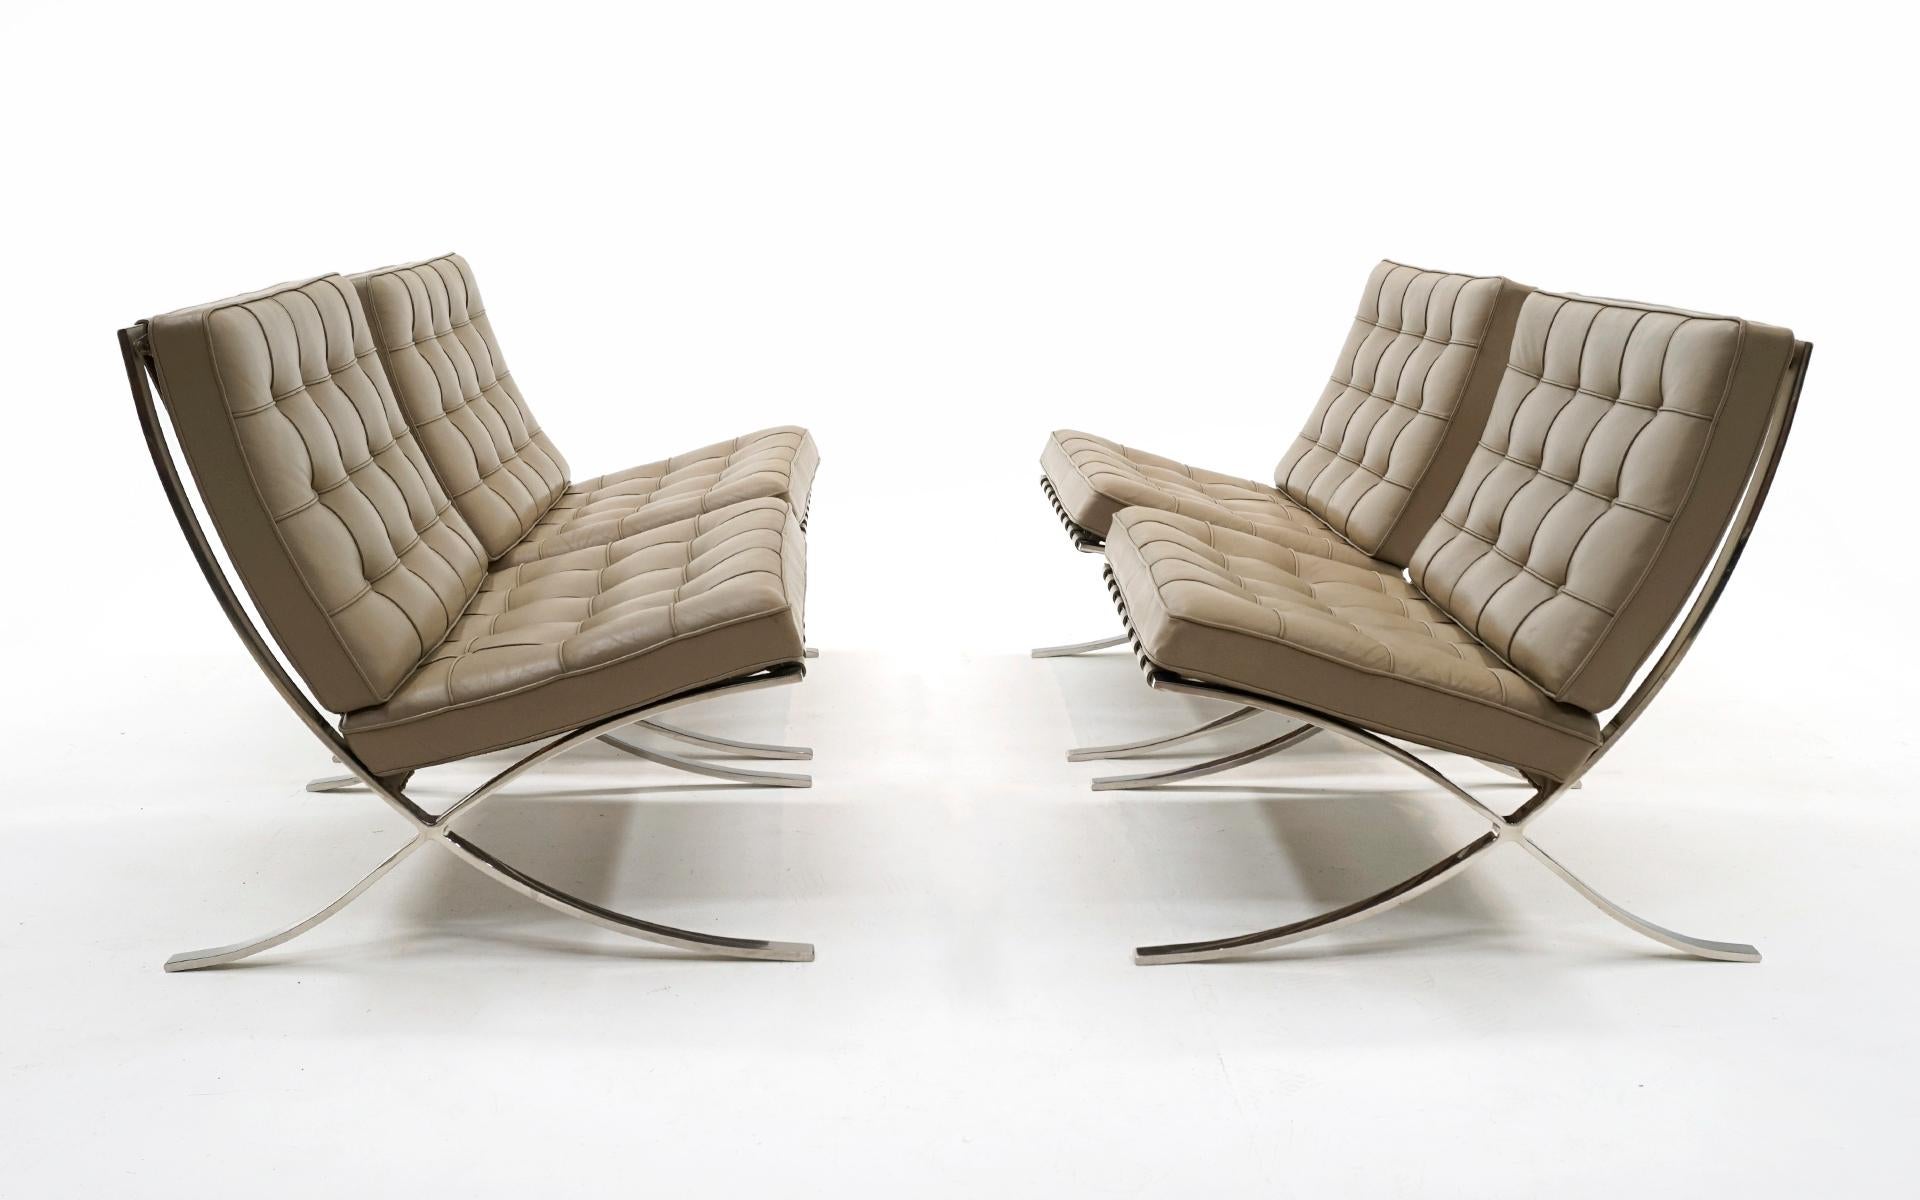 Four available. Price is for each. Beautiful set of Barcelona Chairs designed by Ludwig Mies van der Rohe and produced by Knoll. Each example is signed with the impressed Knoll Studio markings. Greige / Taupe / gray / grey / beige / tan leather.